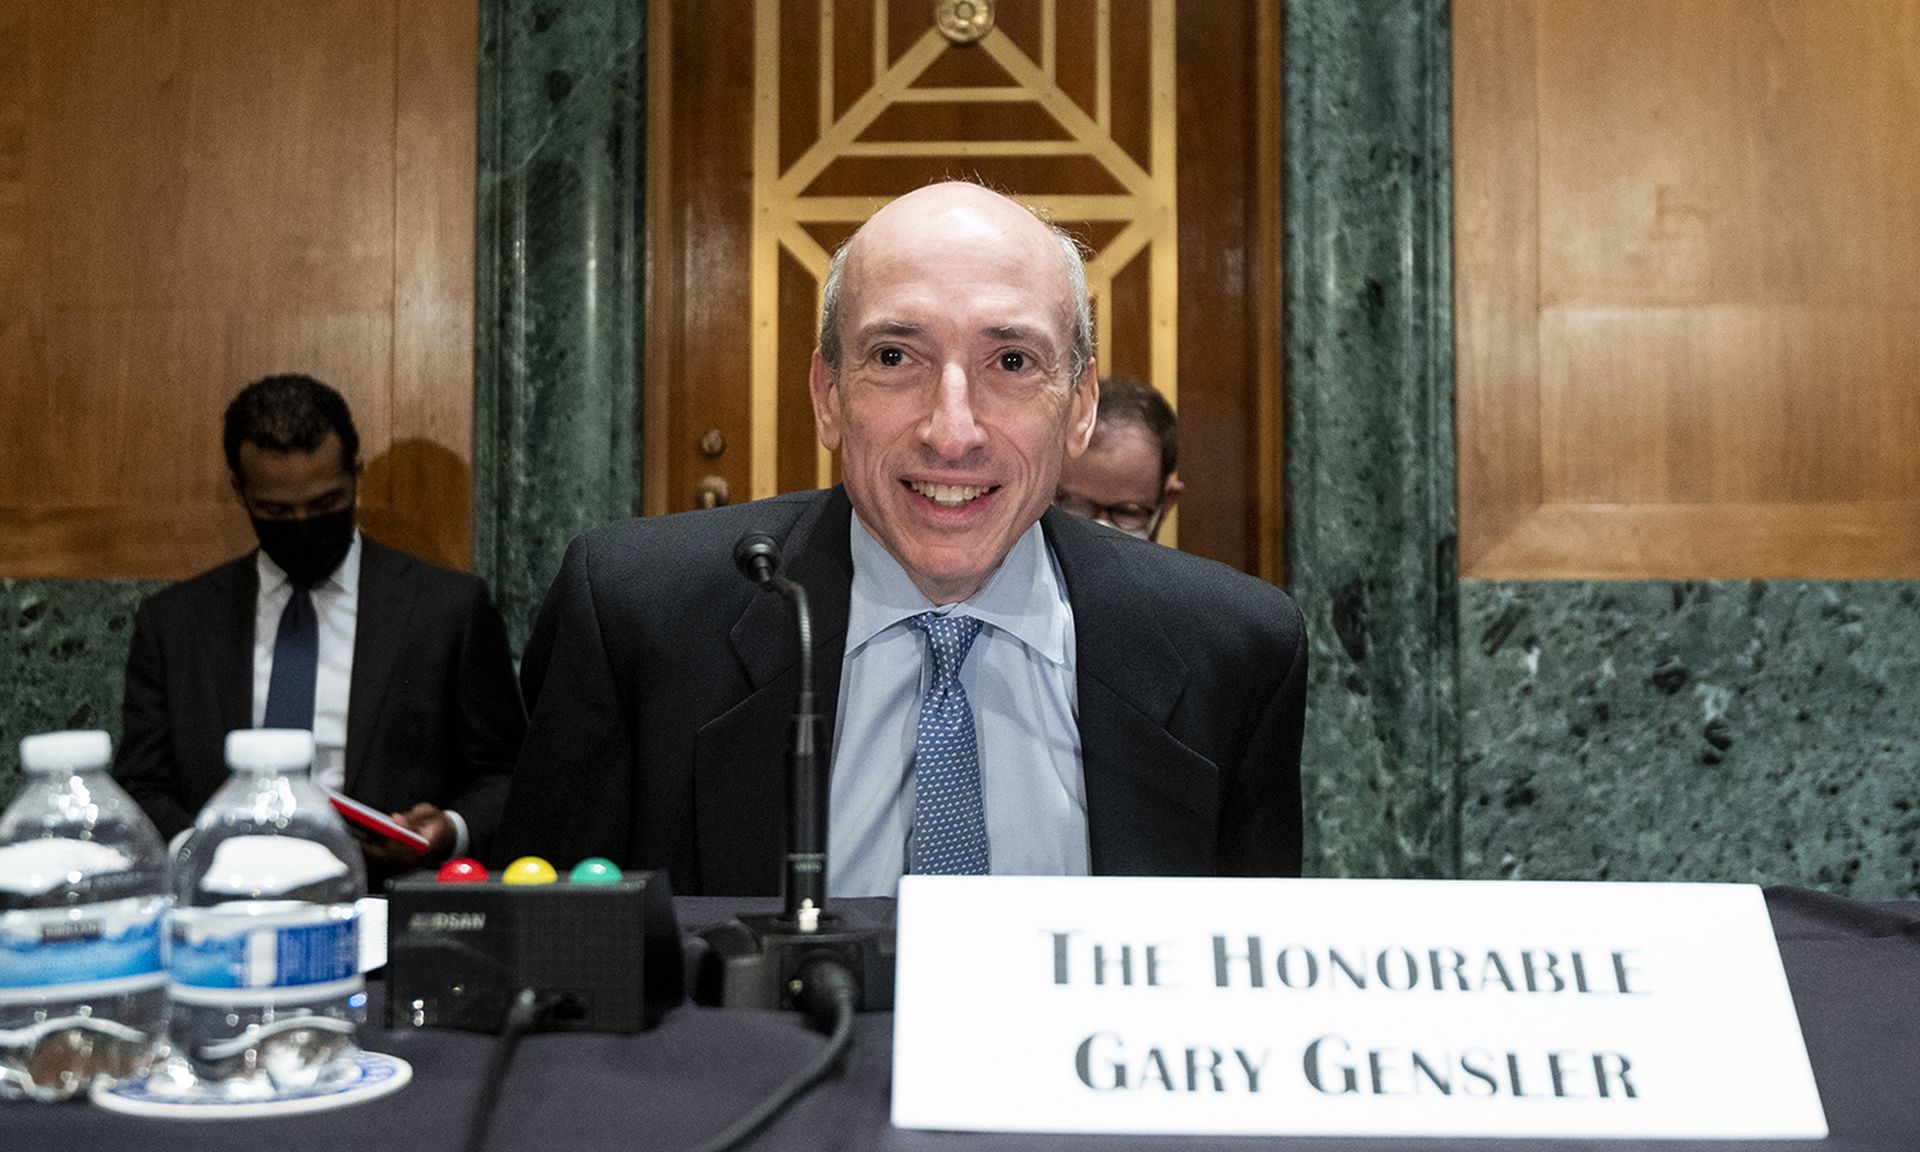 Gary Gensler, chair of the U.S. Securities and Exchange Commission, takes his seat before the start of a Senate Banking, Housing, and Urban Affairs Committee hearing on Sept. 14, 2021, in Washington. (Photo by Bill Clark/Pool via Getty Images)